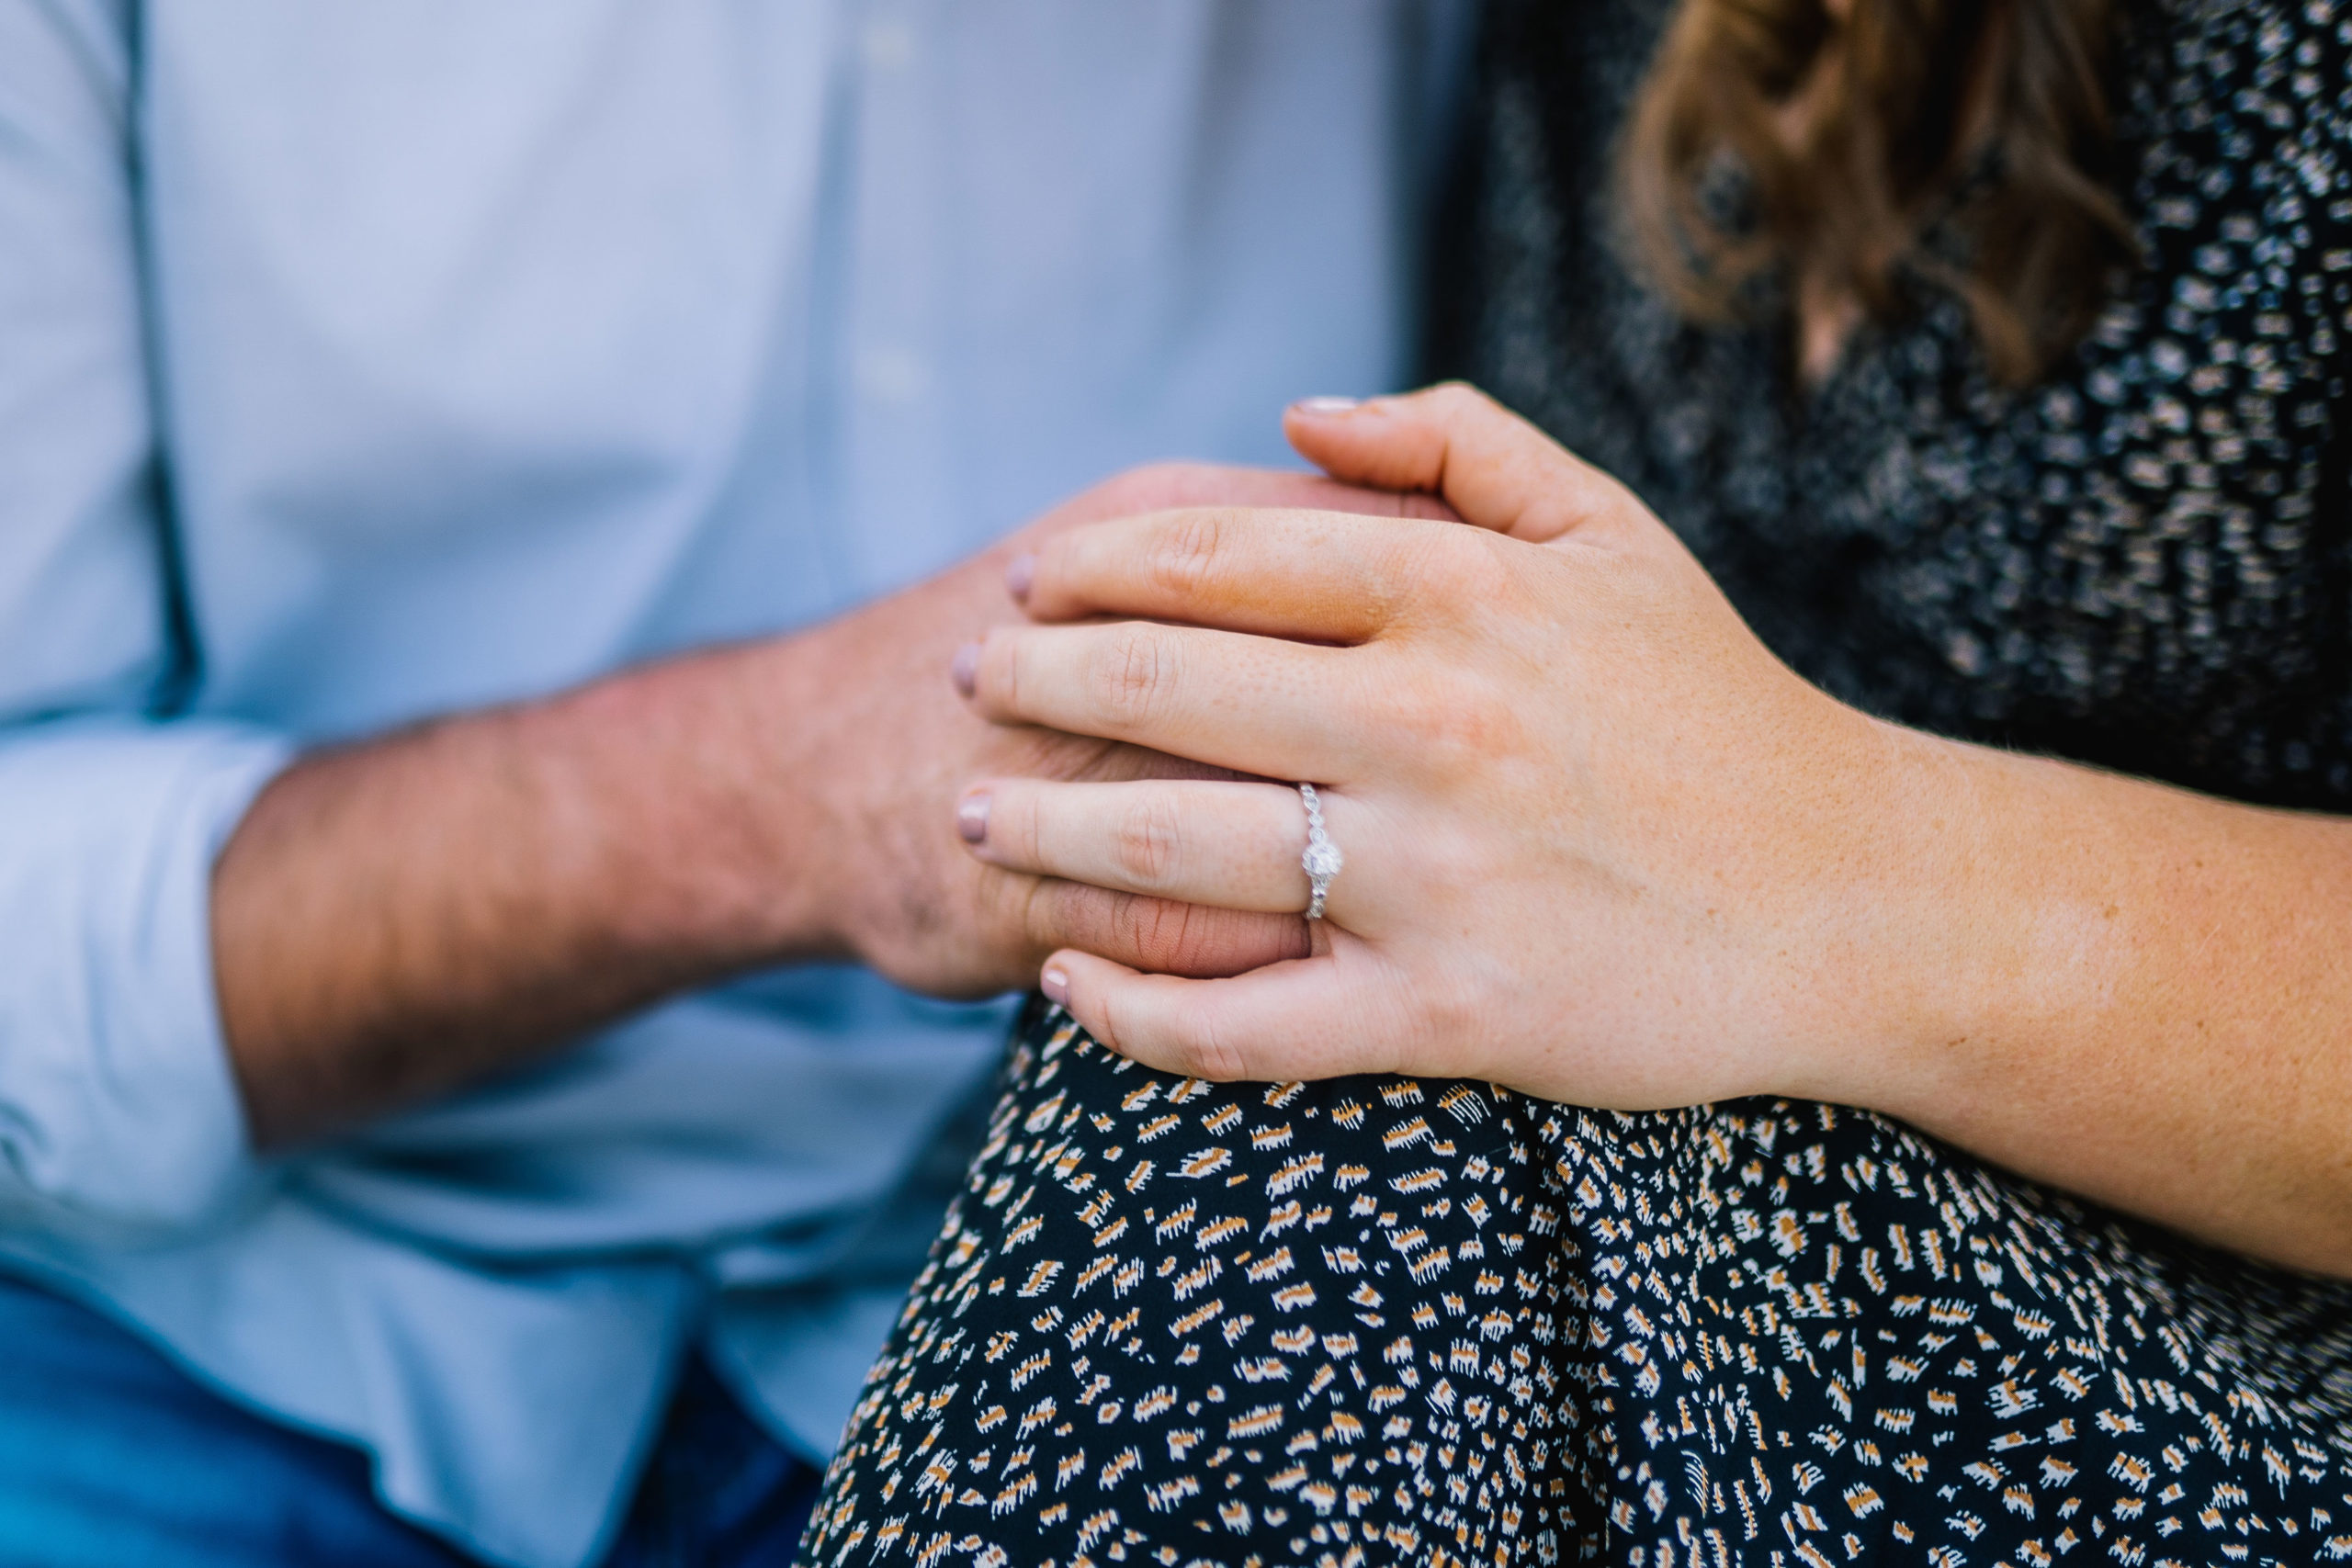 detail shot of an engagement ring in Knoxville woman wearing a block and white dress and man wearing a blue button down while holding hands